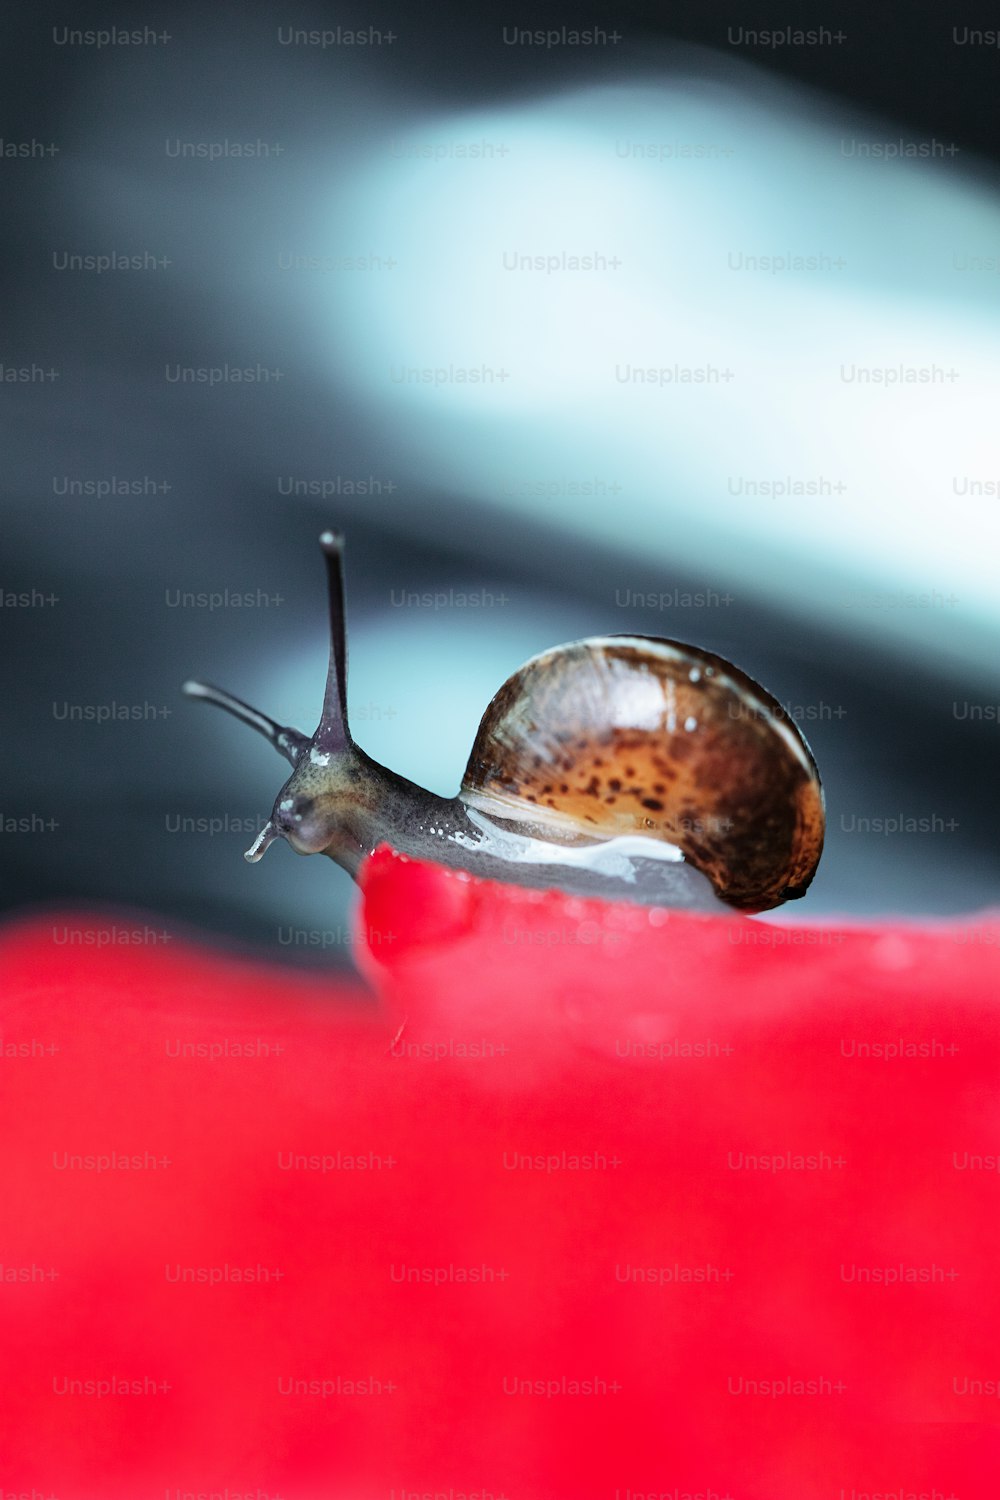 a snail is crawling on a red surface